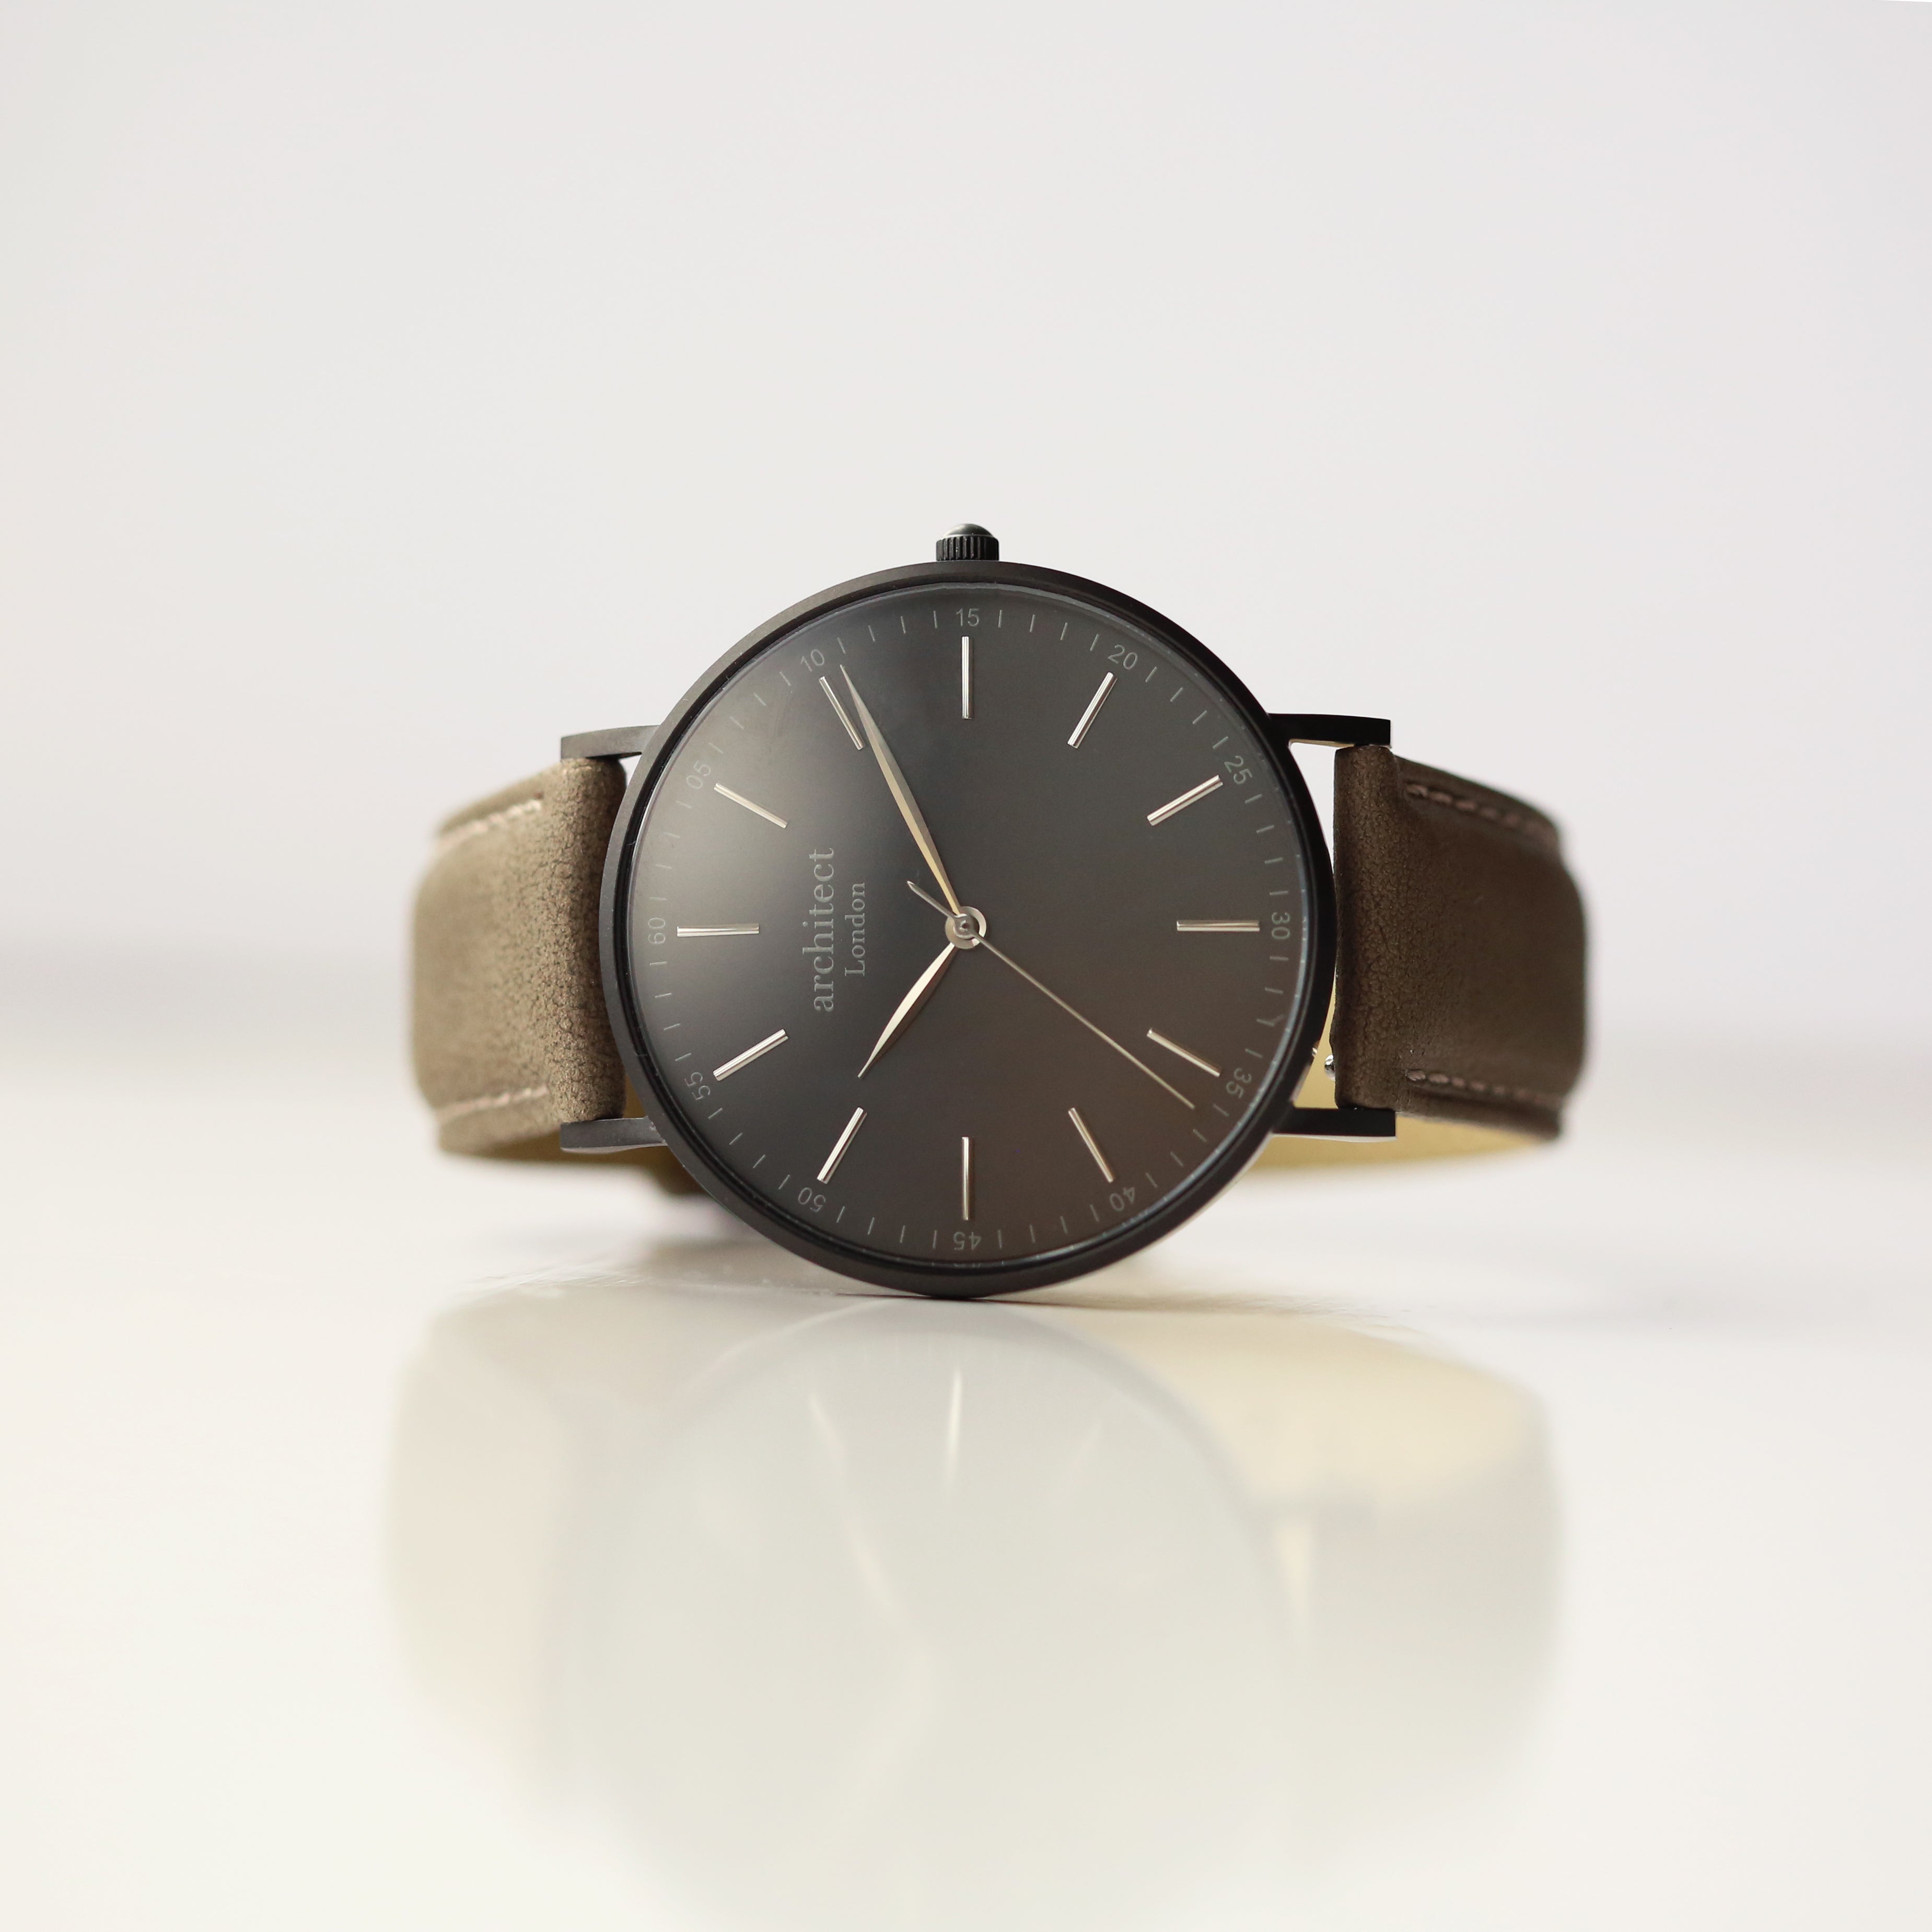 Contactless Payment Watch - Men's Architect Minimalist + Urban Grey Strap + Own Handwriting Engraving